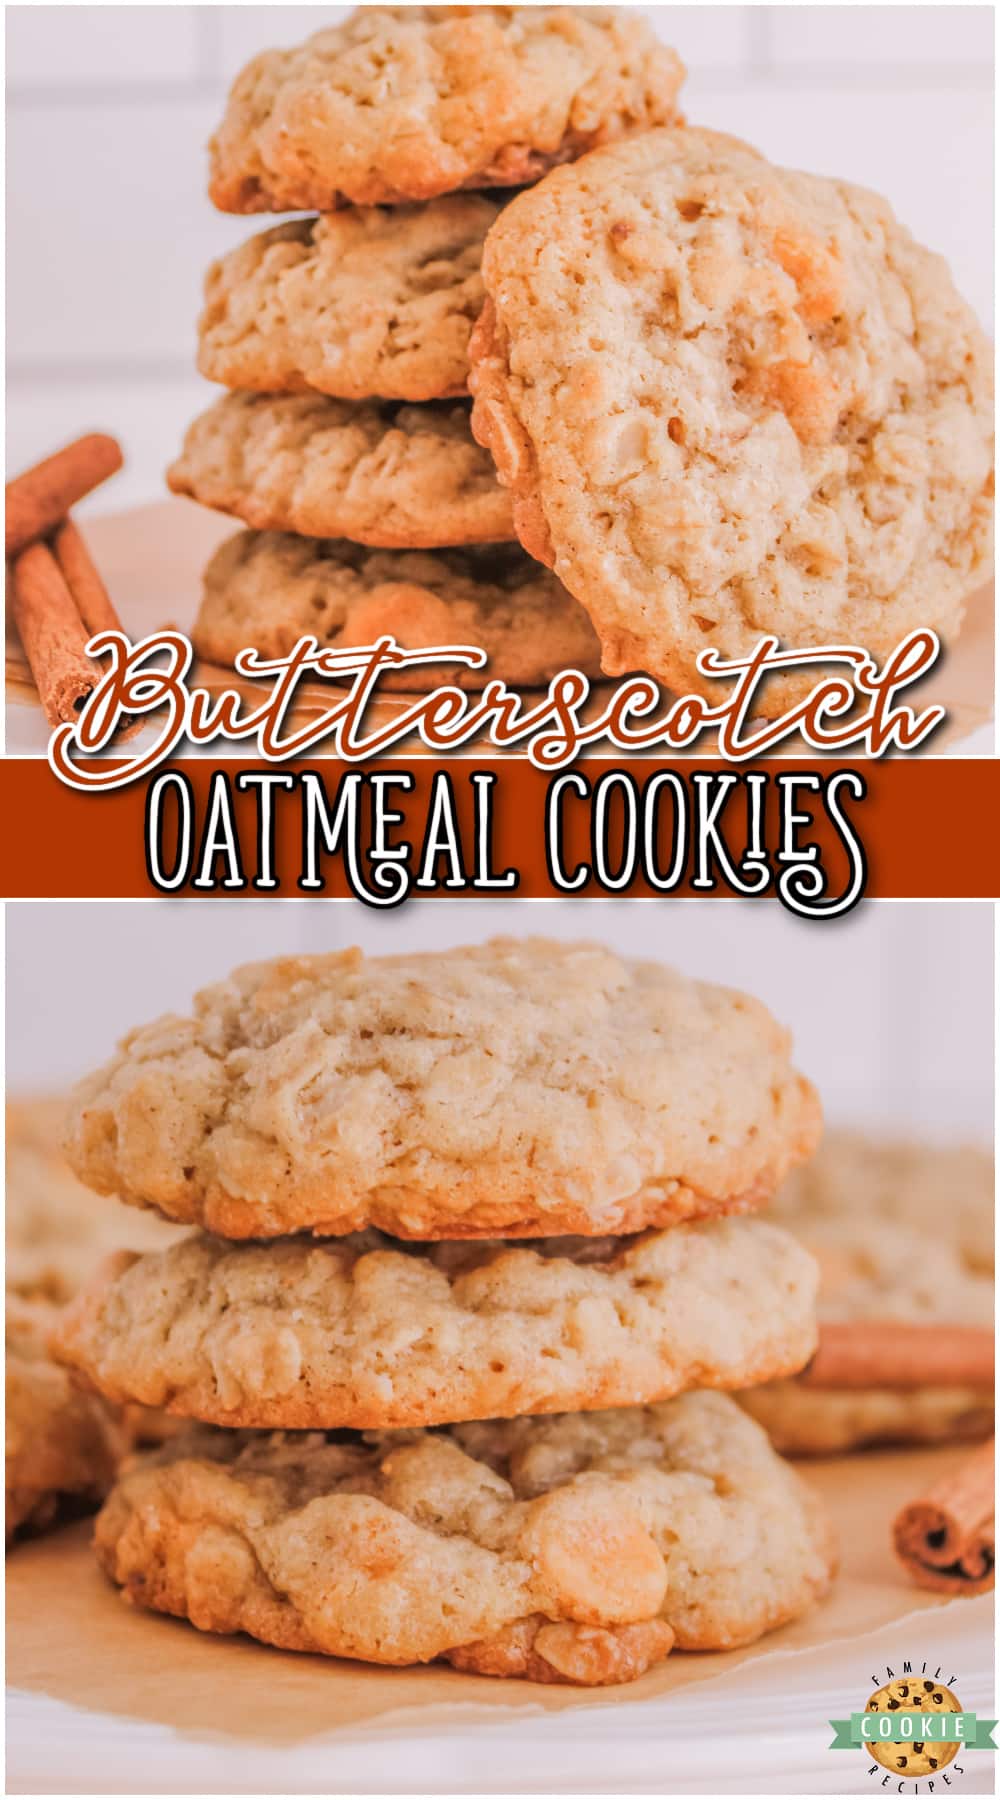 Oatmeal Butterscotch Cookies are a delicious fall favorite, made with chewy oats and studded with creamy bits of butterscotch. This recipe for oatmeal scotchies is incredible, every cookie is buttery, well spiced and the texture is simply amazing.